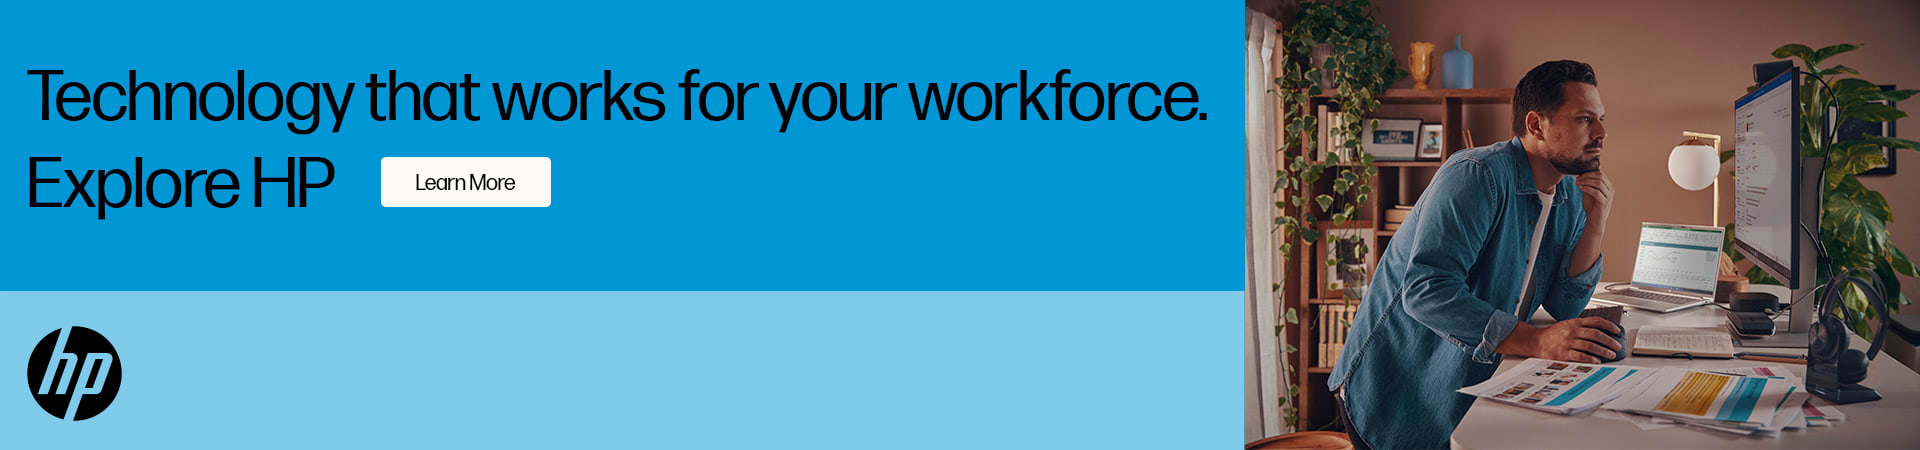 Technology that works for your workforce. Explore HP